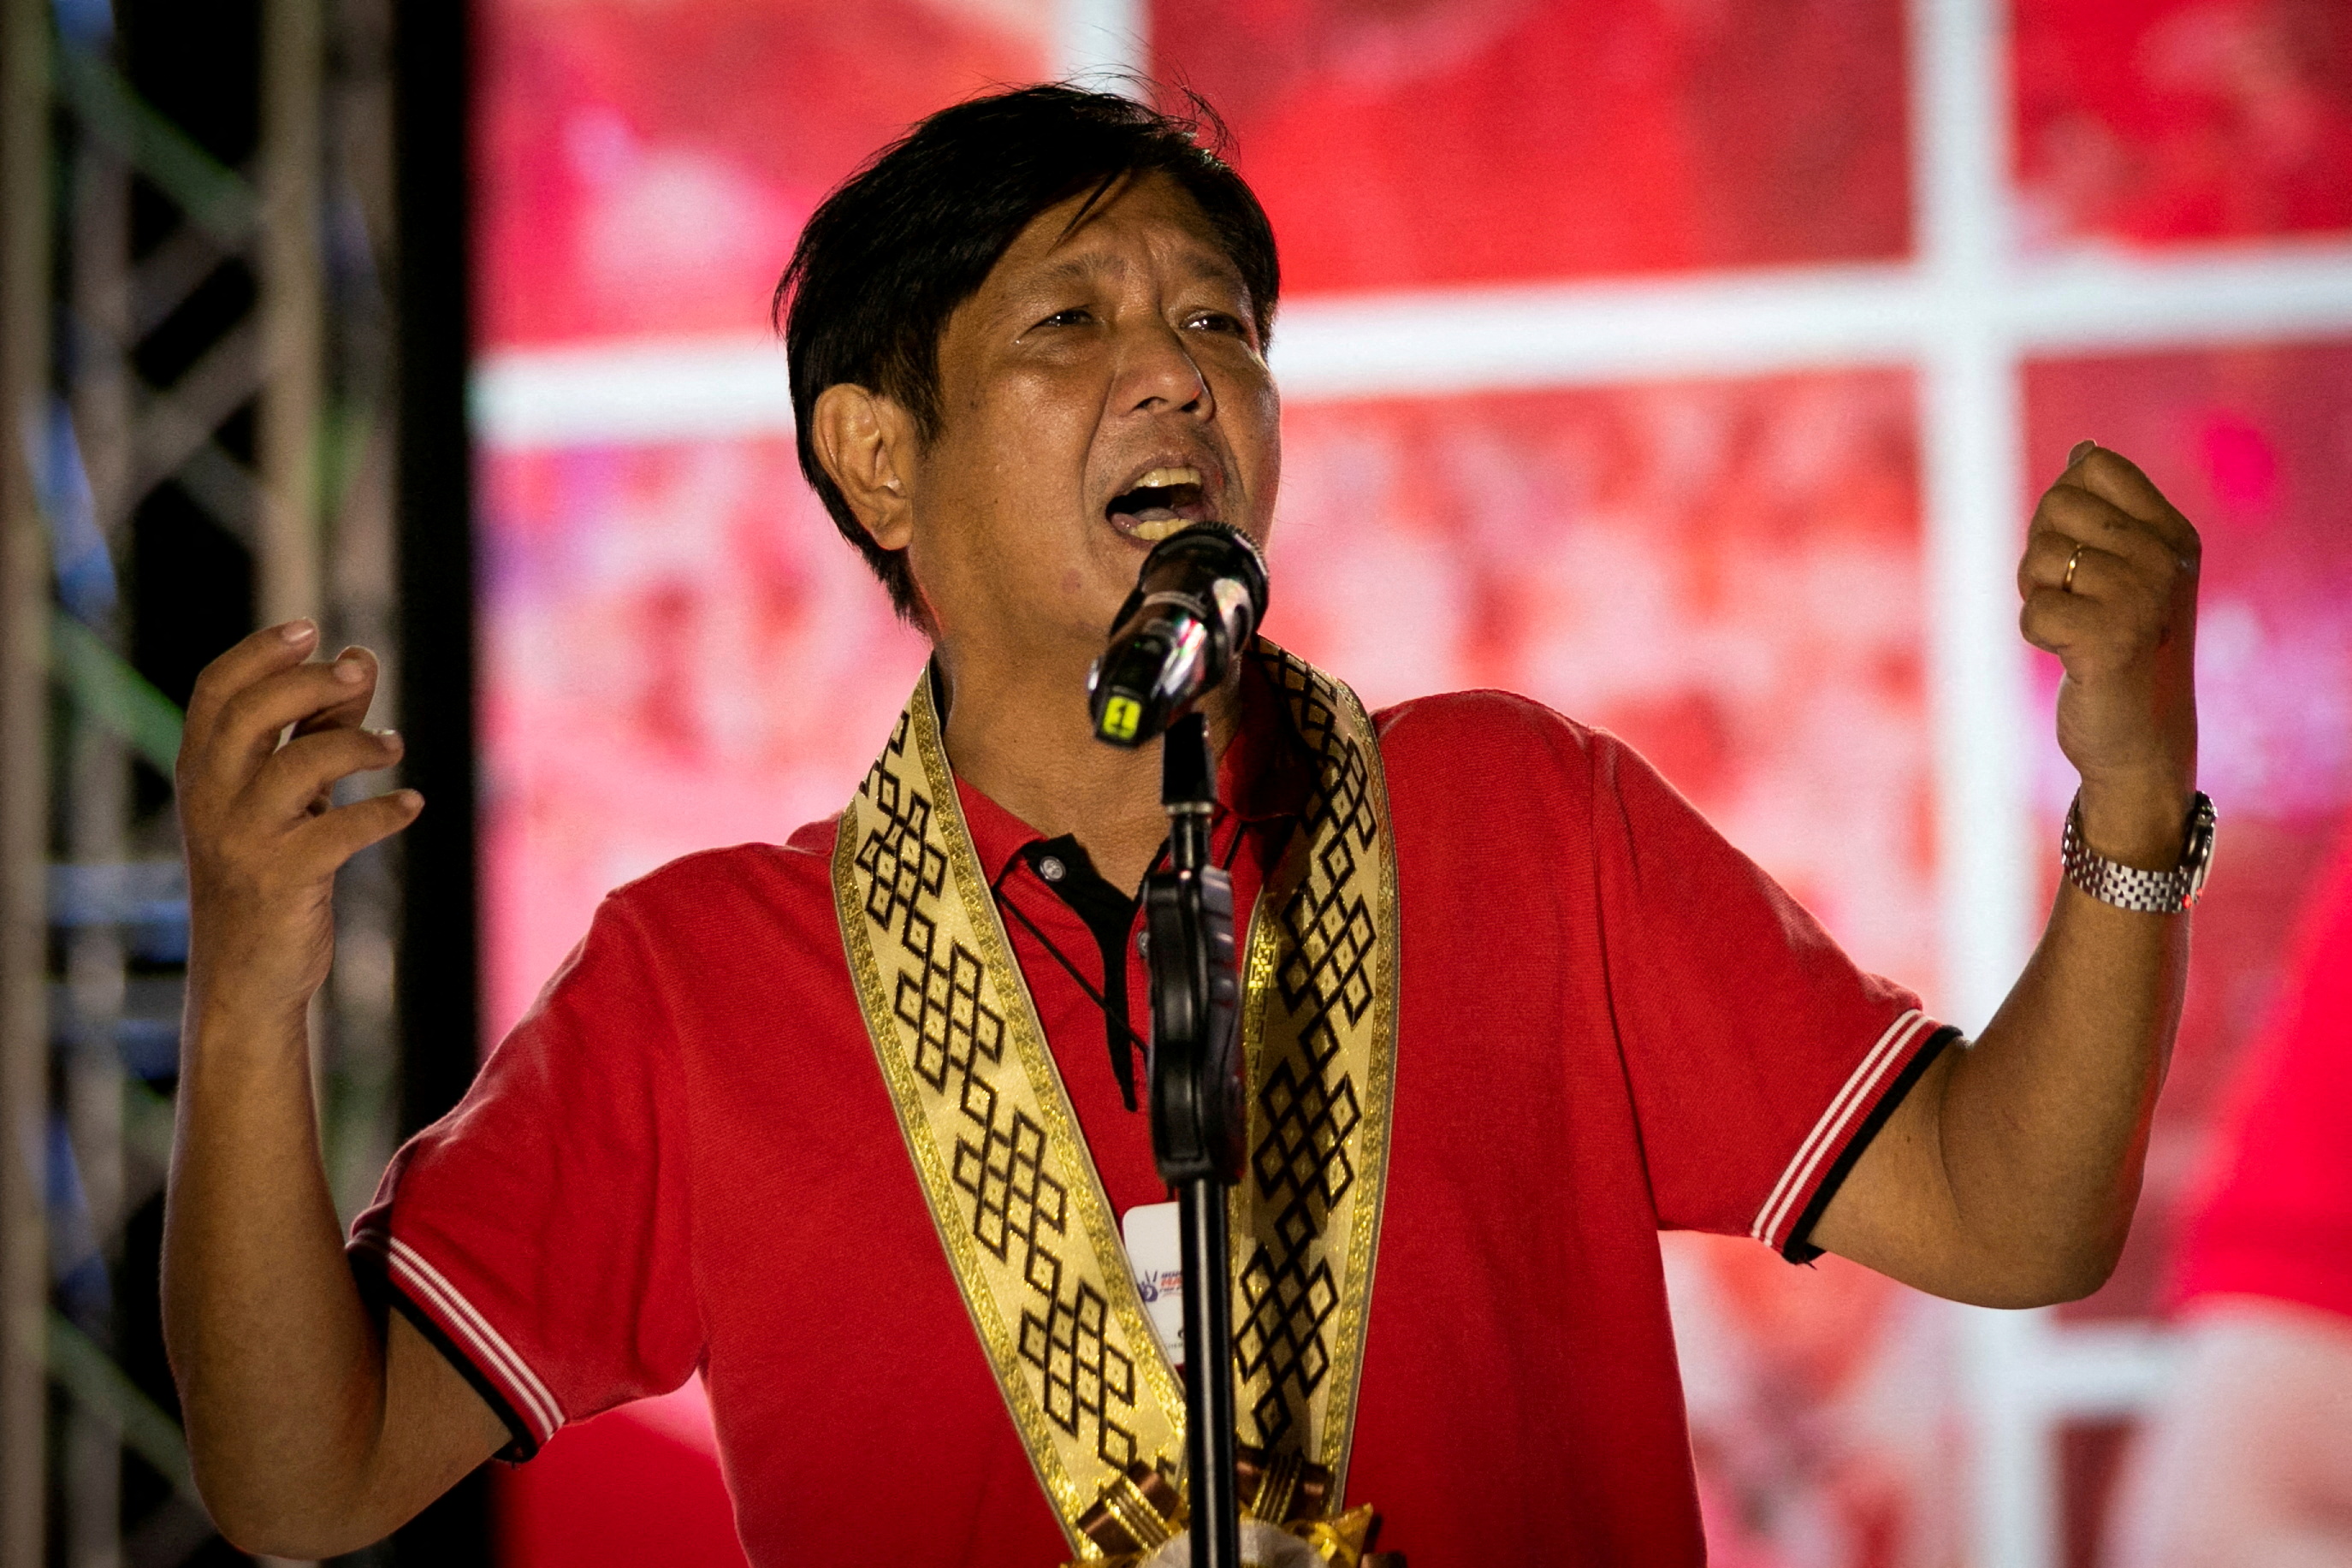 Ferdinand Marcos Jr., son of late dictator Ferdinand Marcos, campaigns for presidency